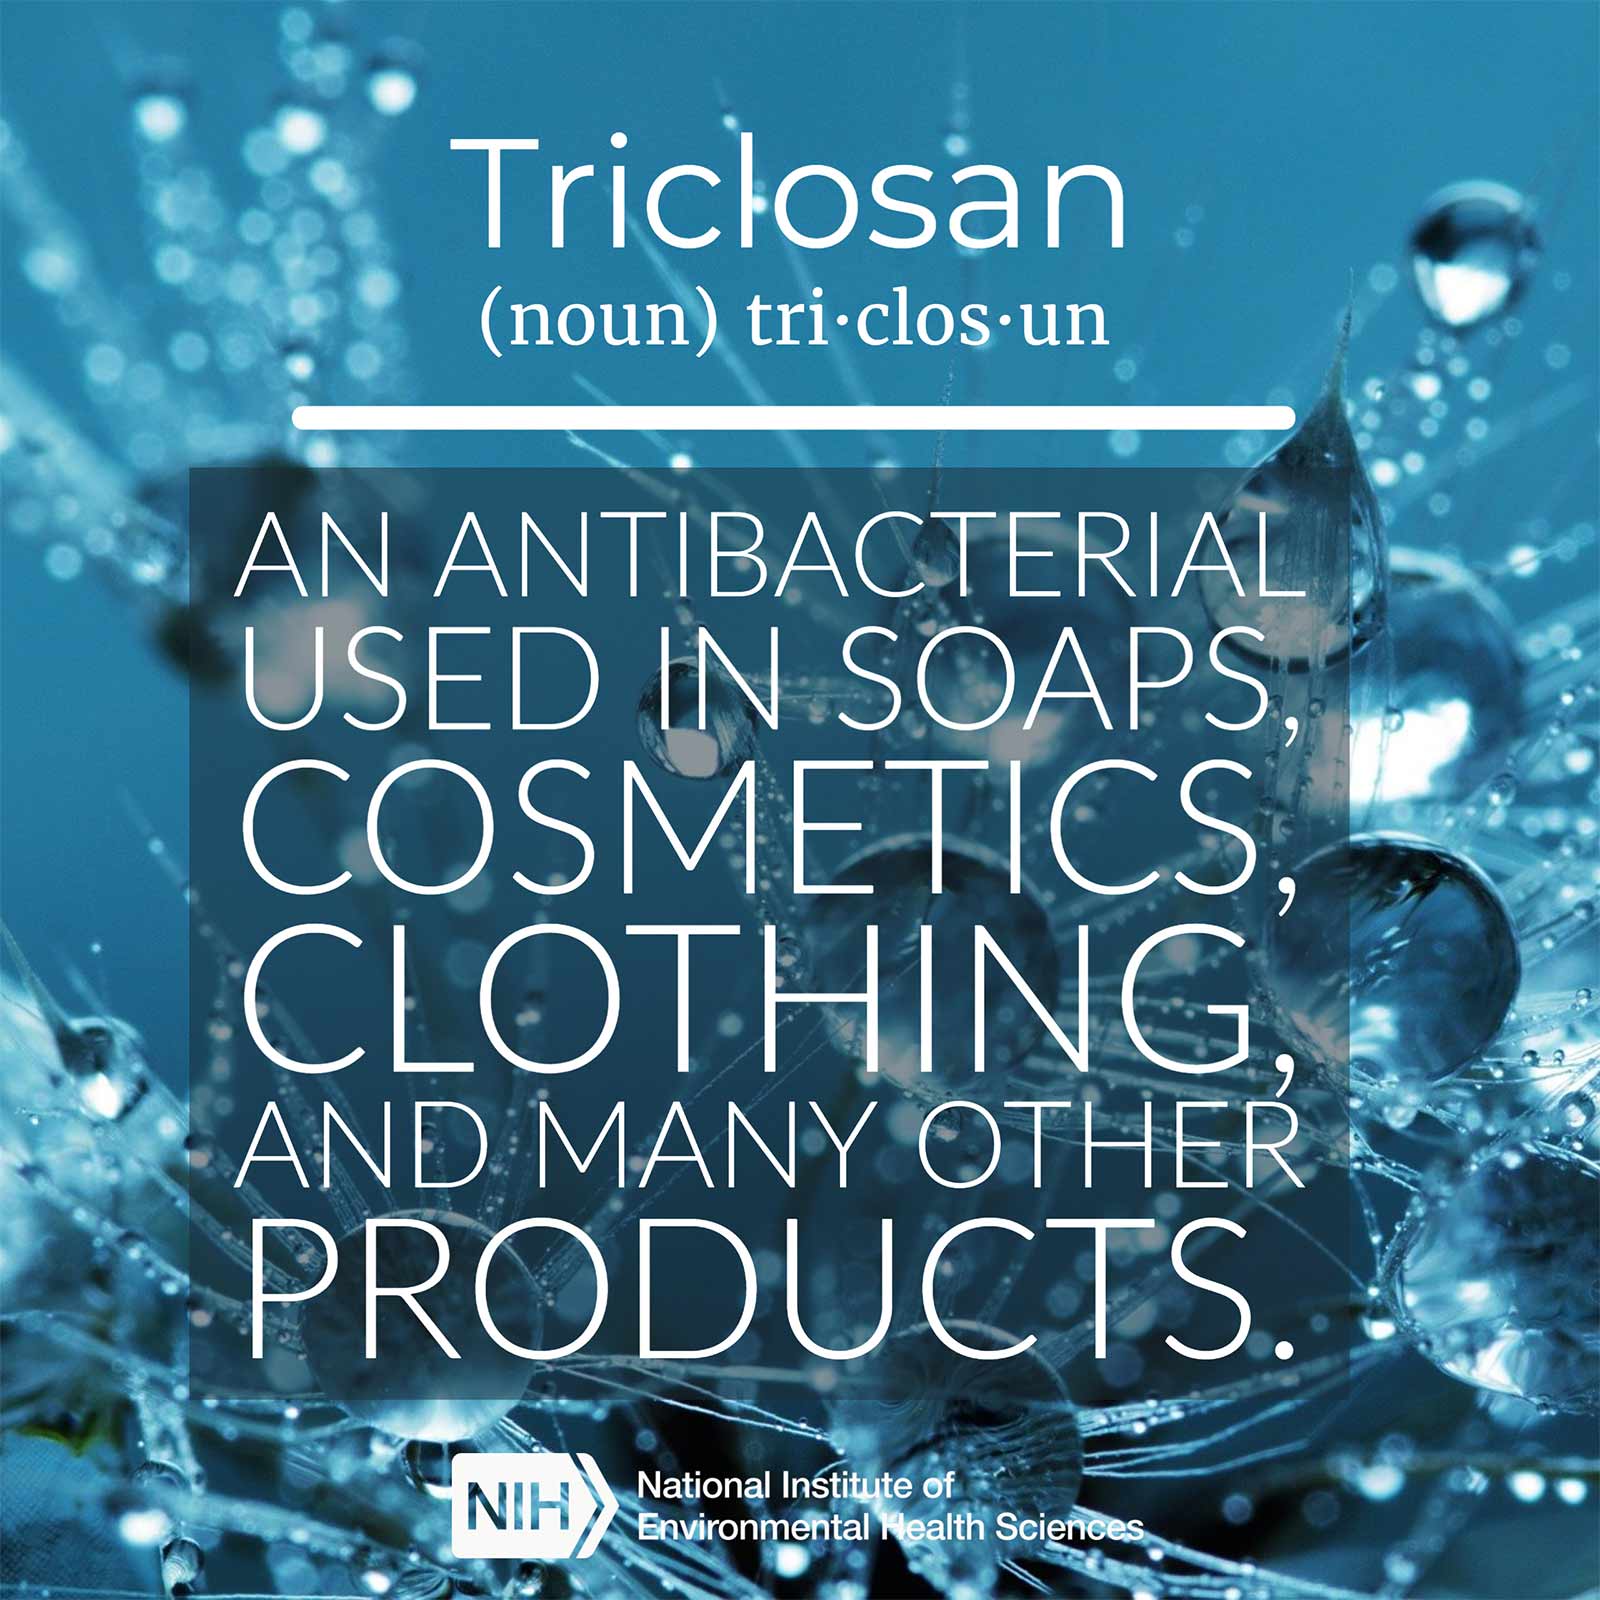 Triclosan (noun) defined as &#39;an antibacterial used in soaps, cosmetics, clothing, and many other products.&#39;